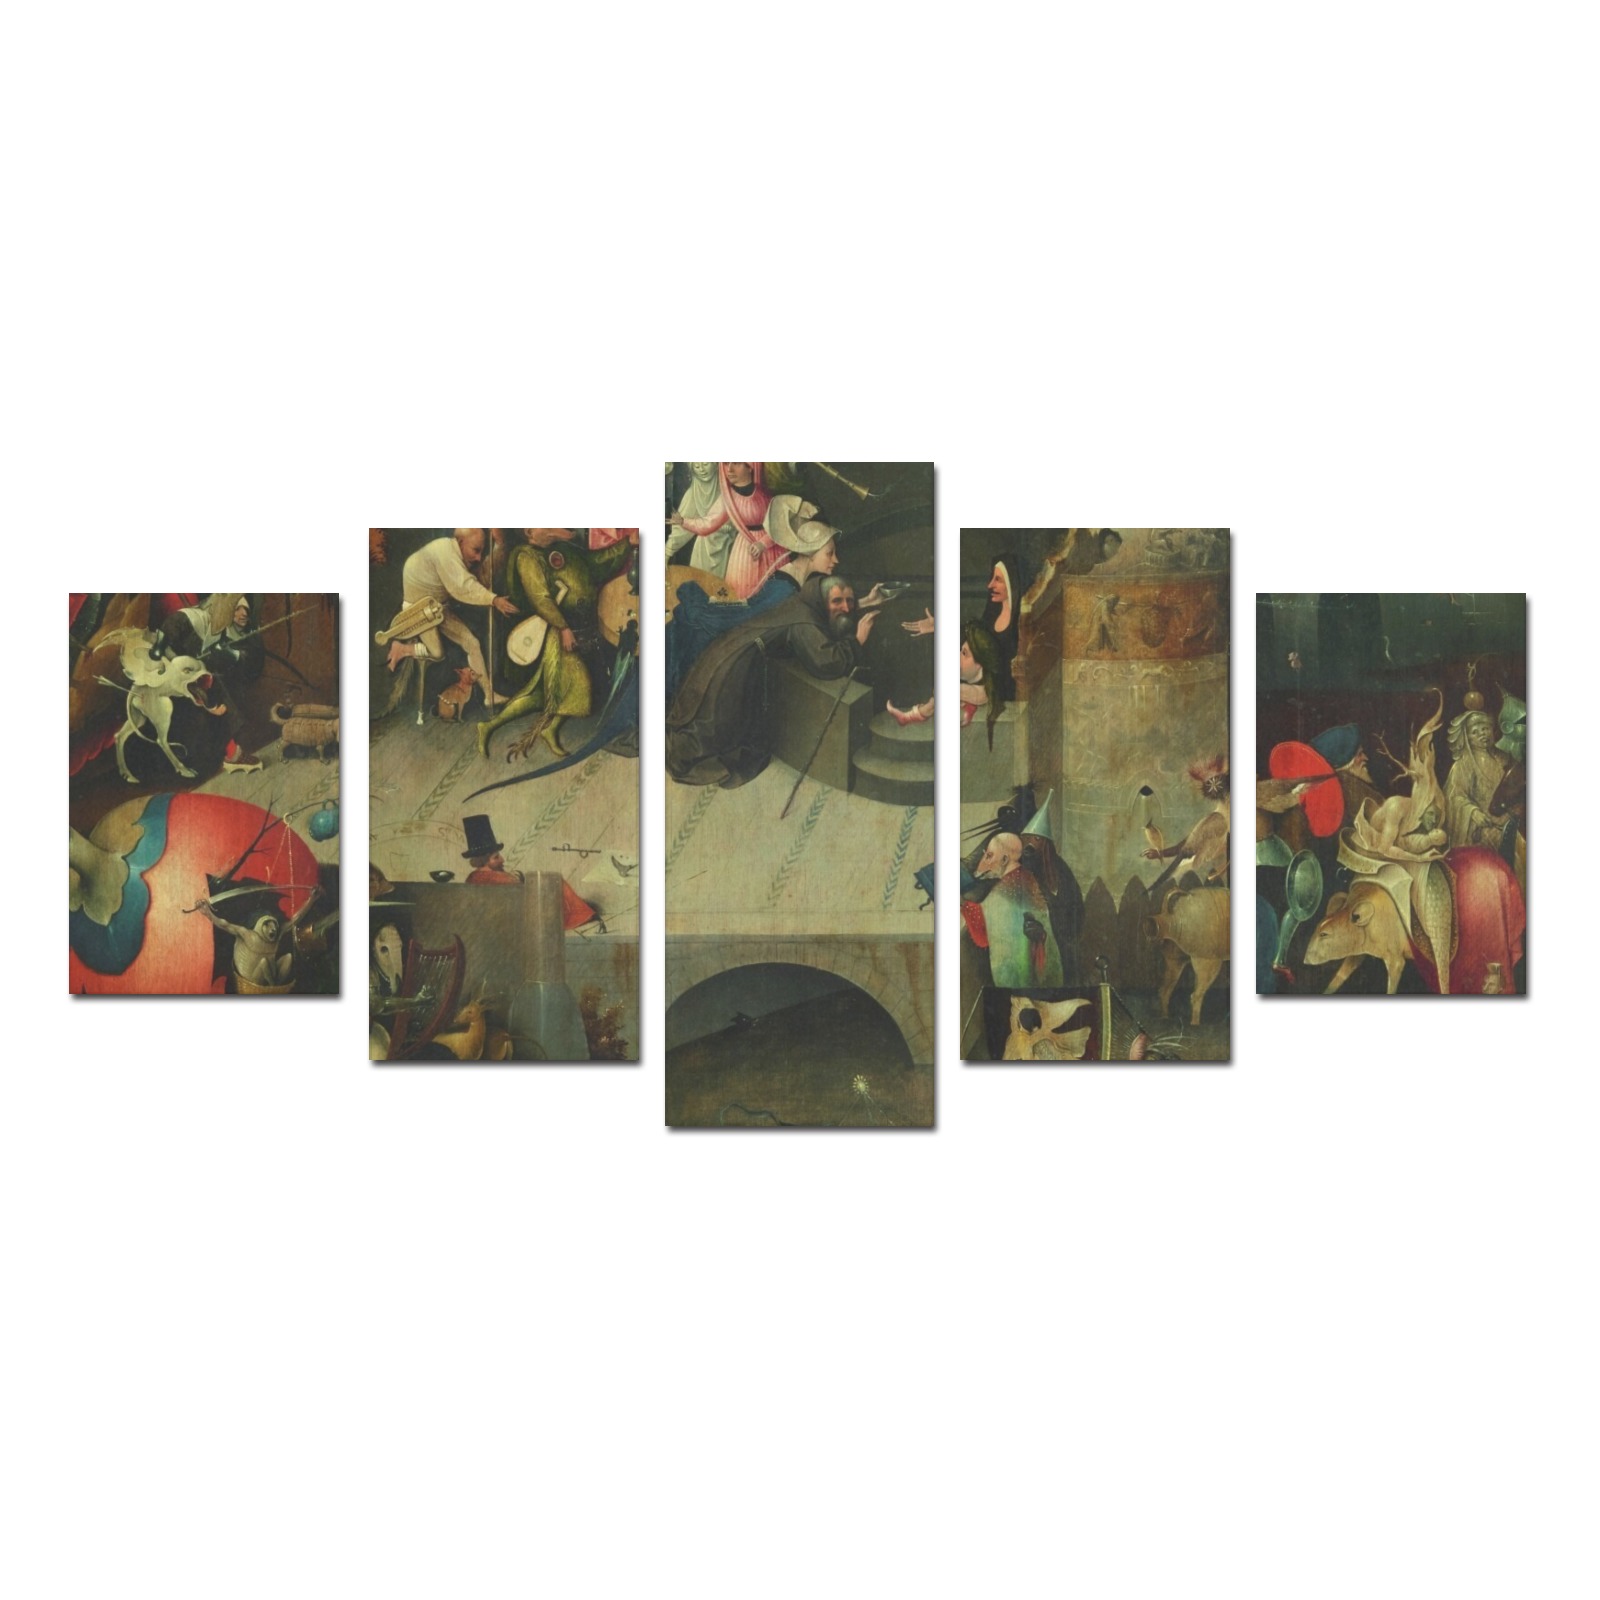 Hieronymus Bosch-The Temptation of St Anthony Canvas Print Sets D (No Frame)